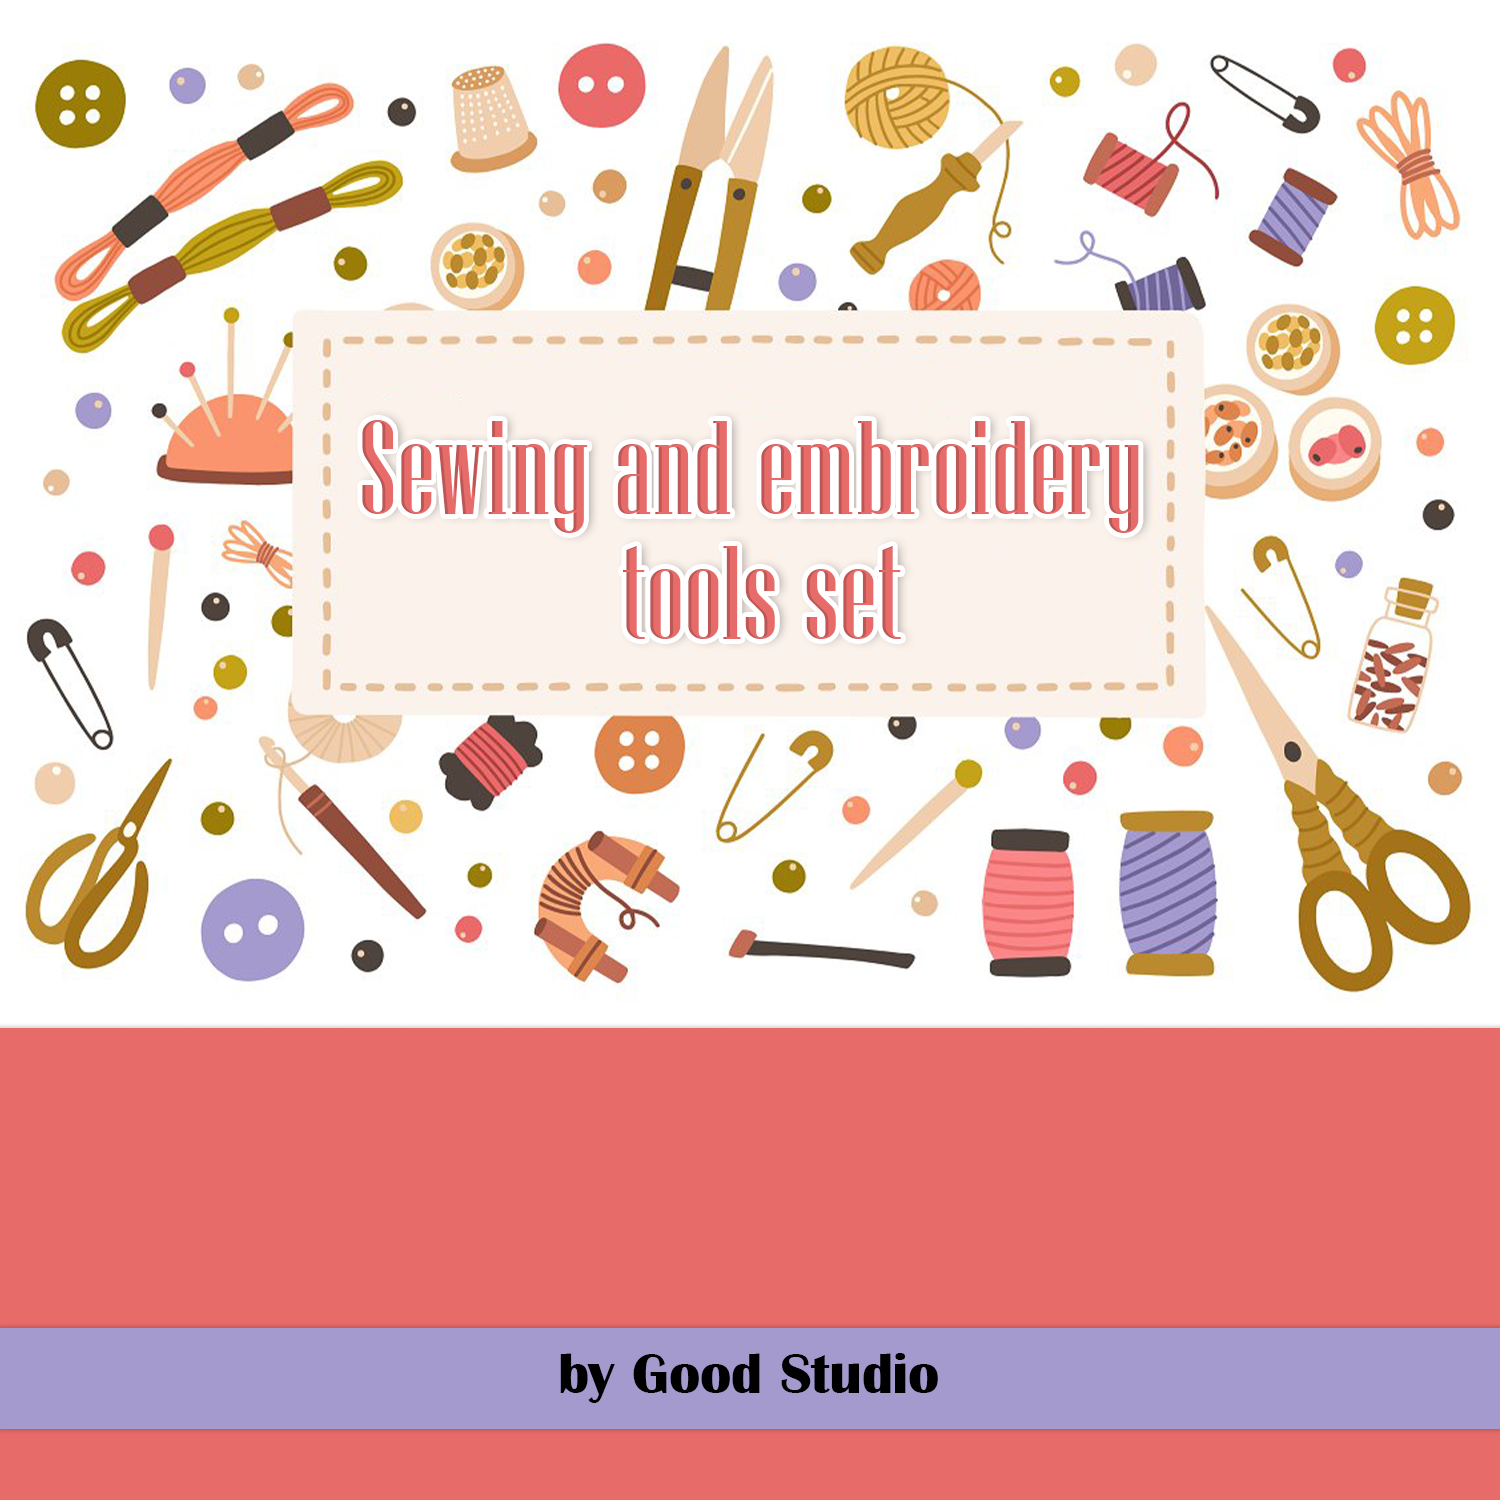 Sewing and embroidery tools set for facebook.